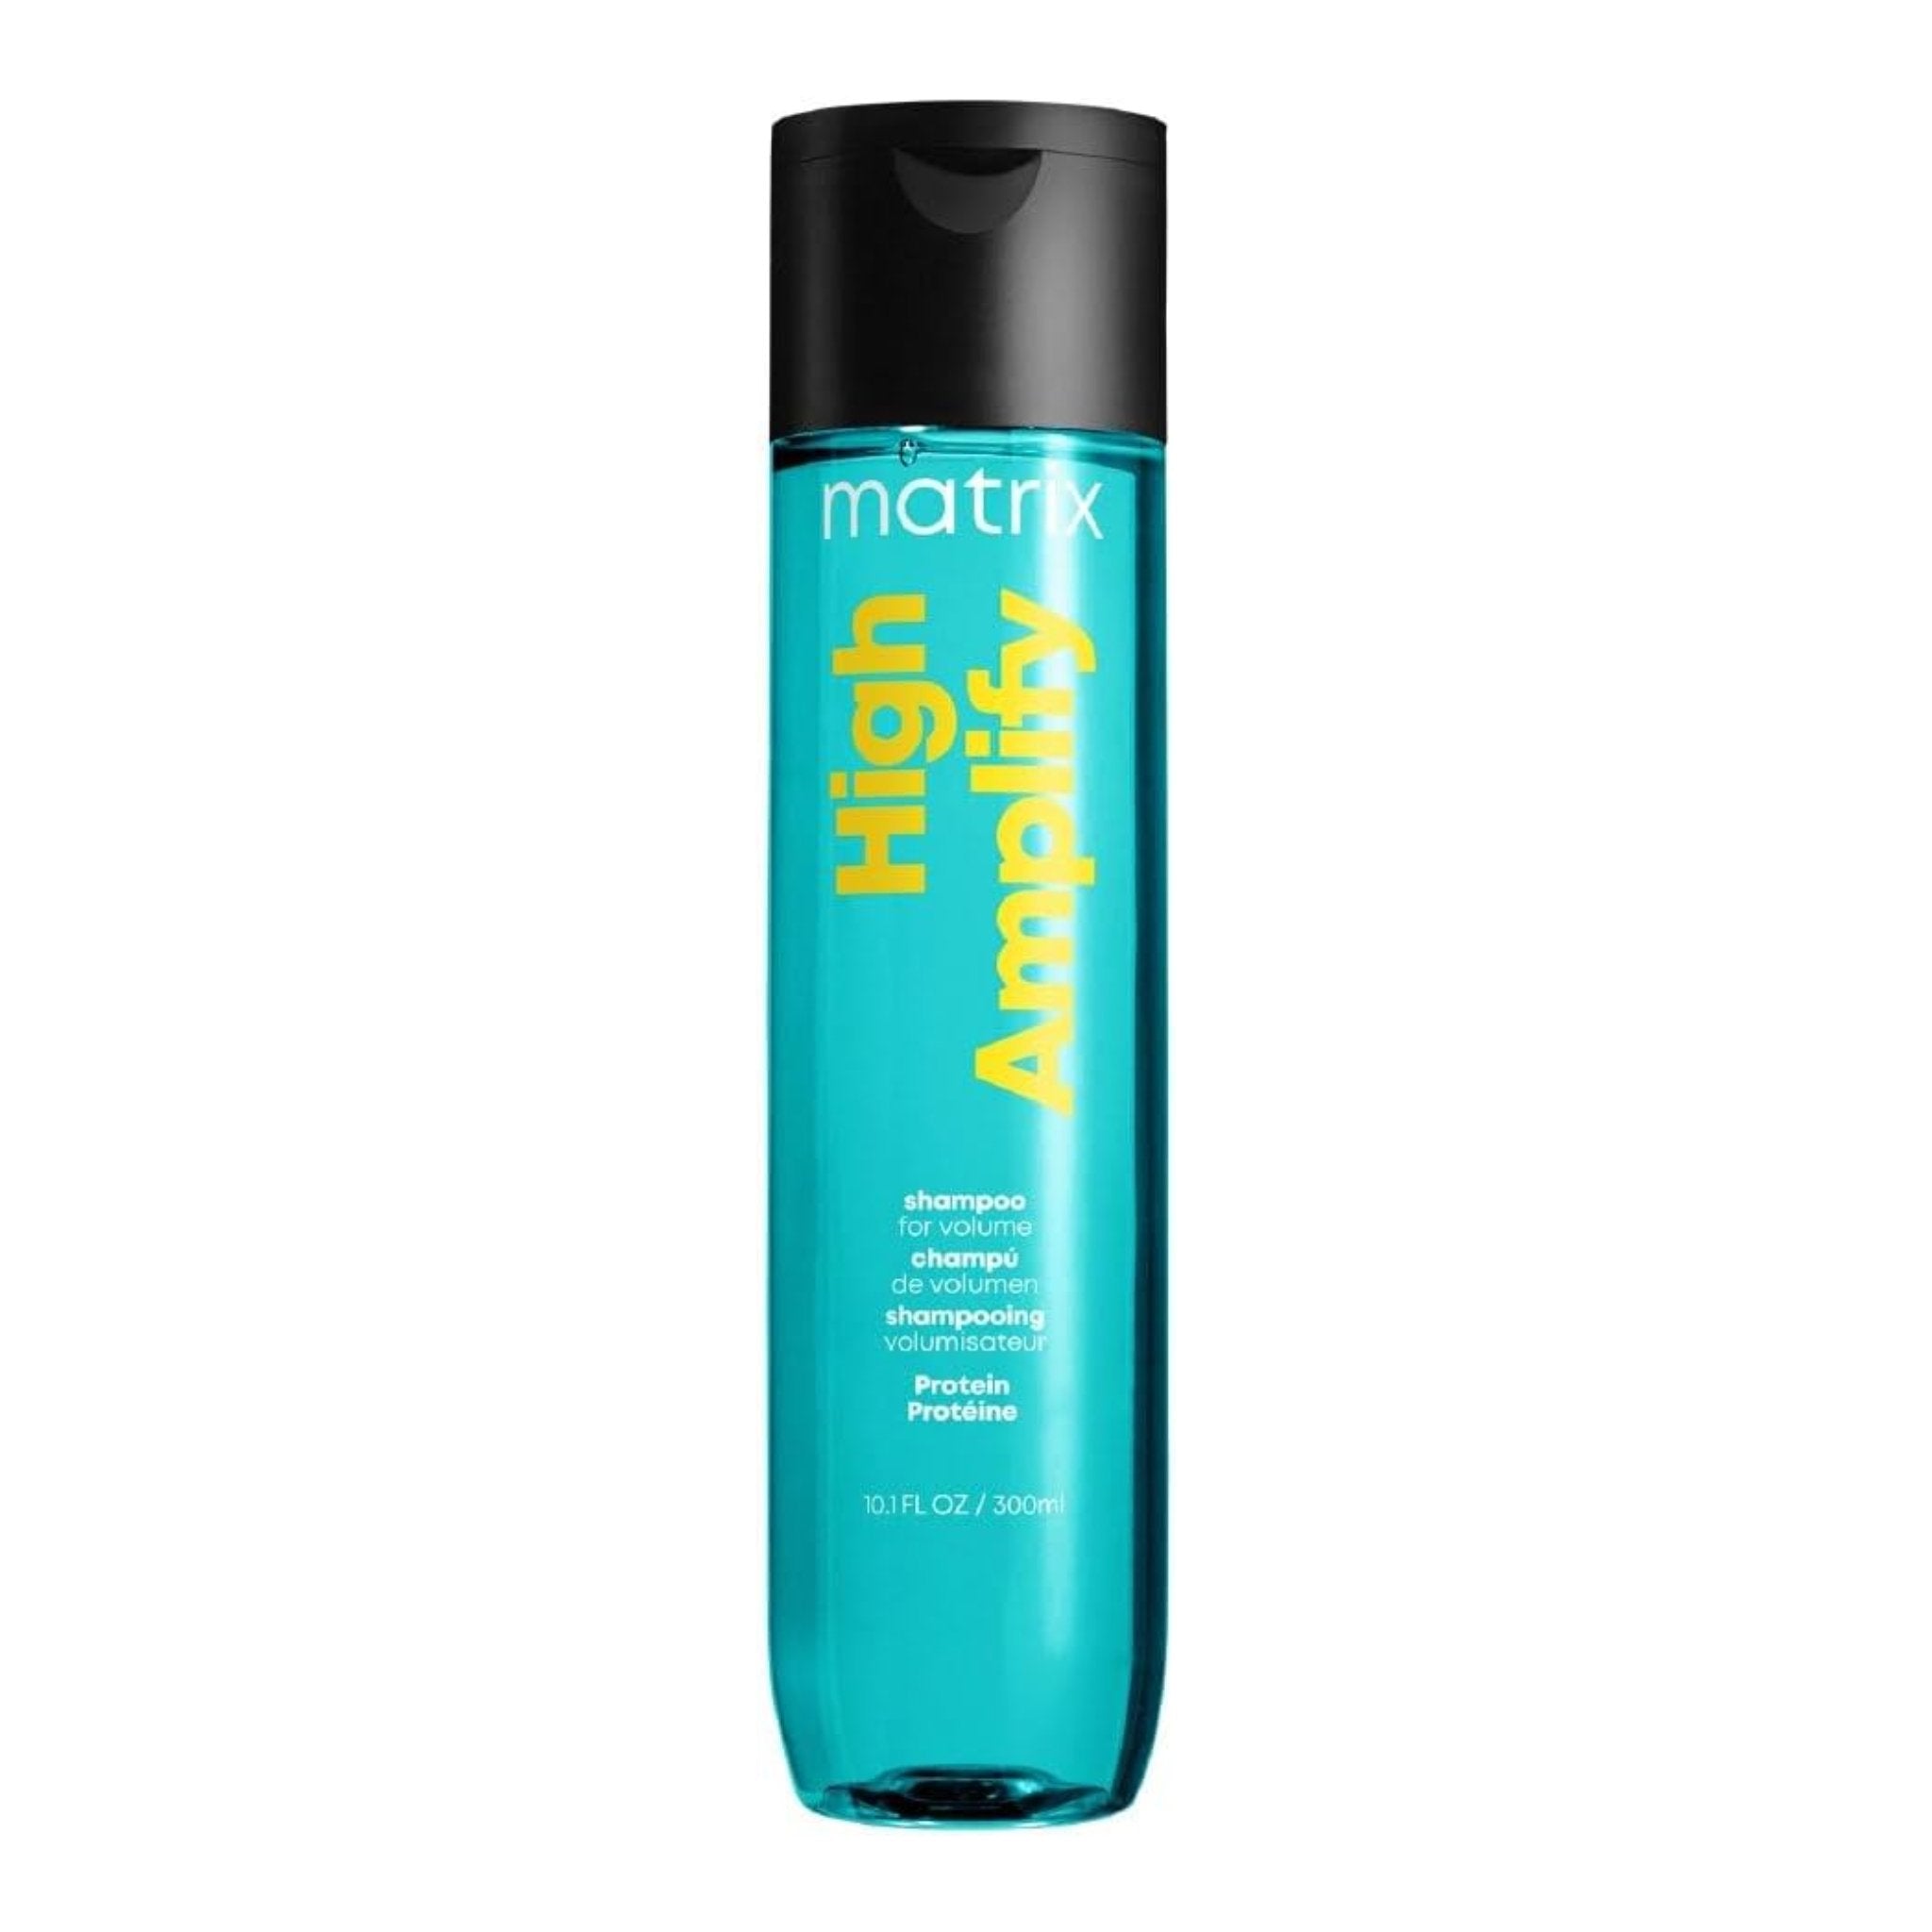 Matrix. Total Results Shampoing High Amplify - 300 ml - Concept C. Shop